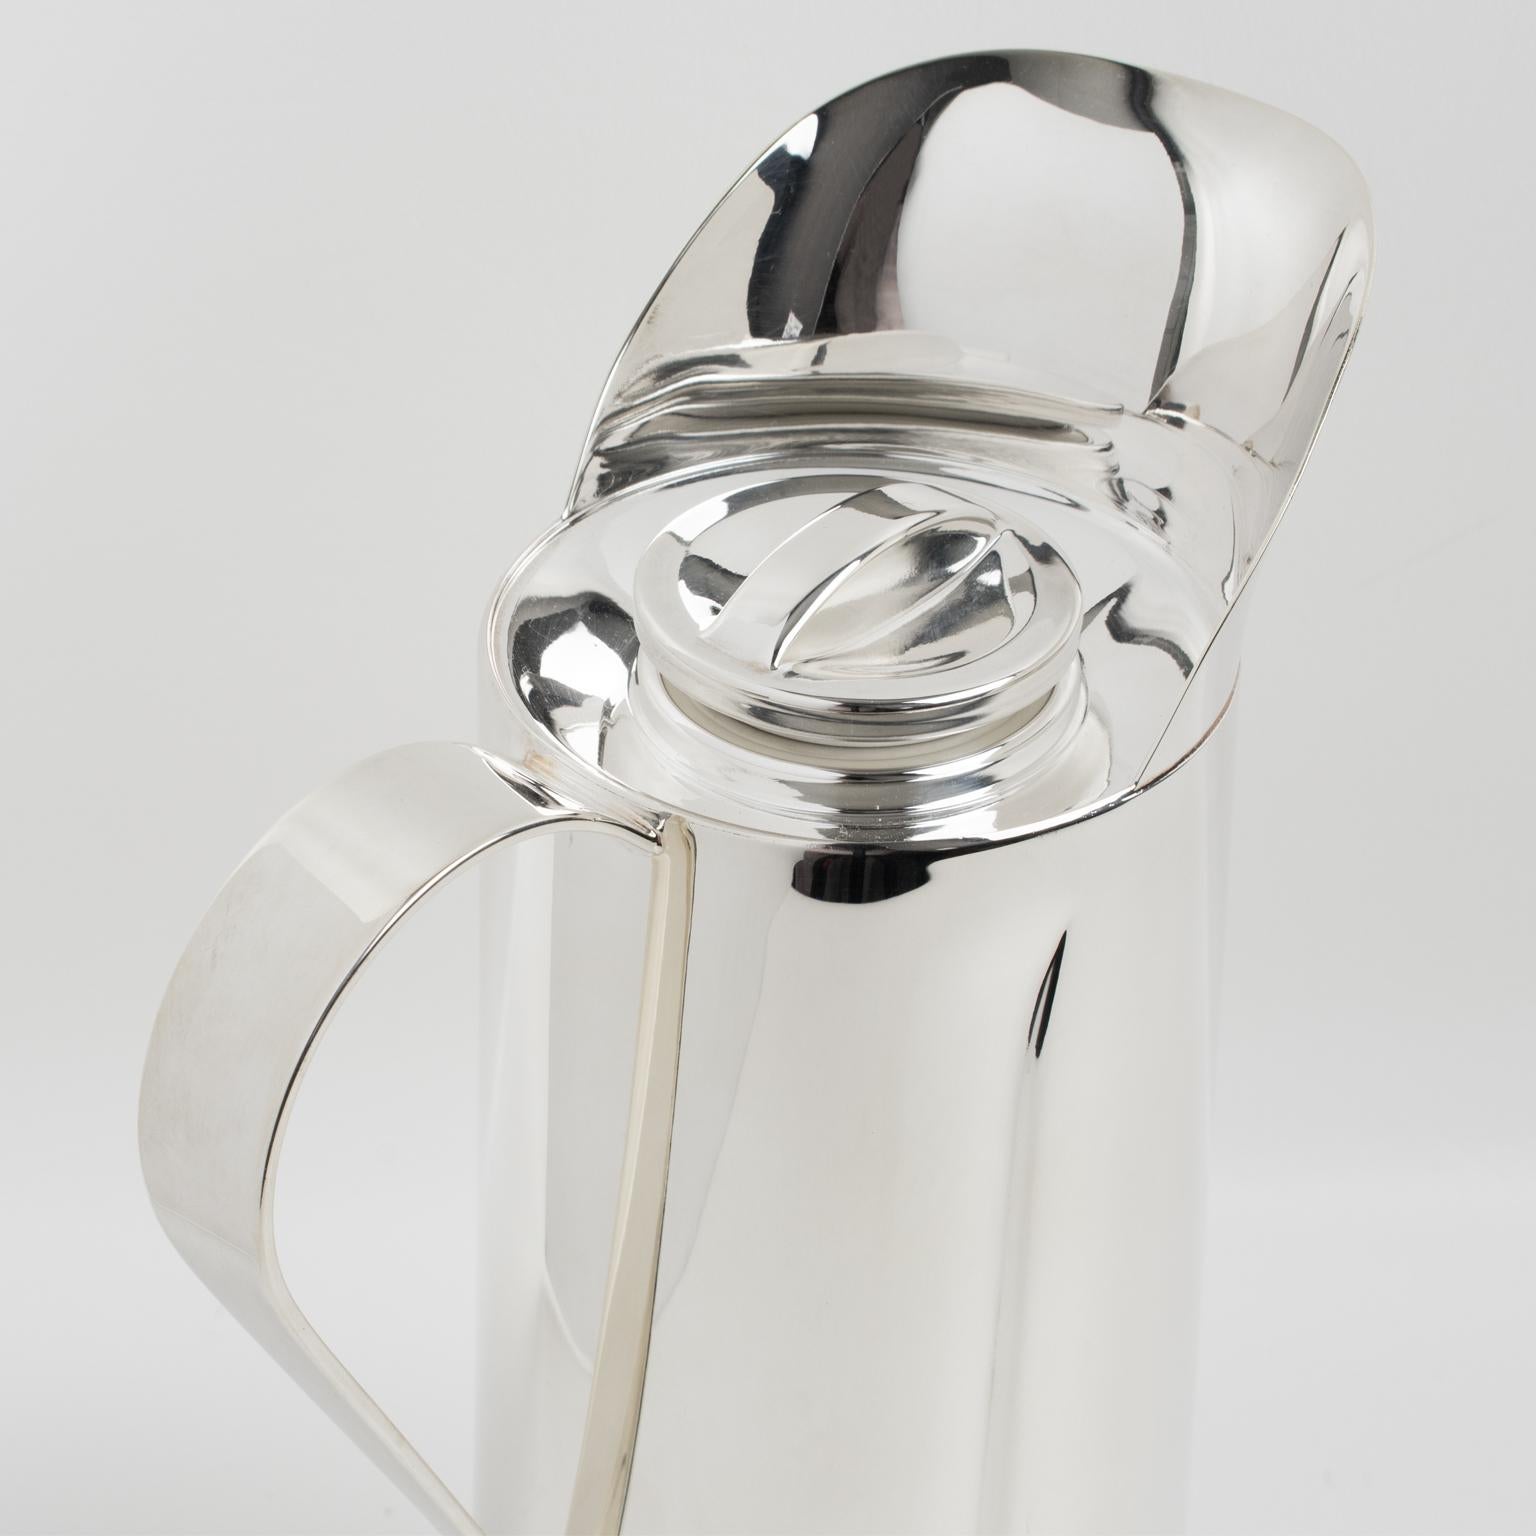 Late 20th Century Italian Silver Plate Thermos Insulated Decanter Coffee Jug For Sale